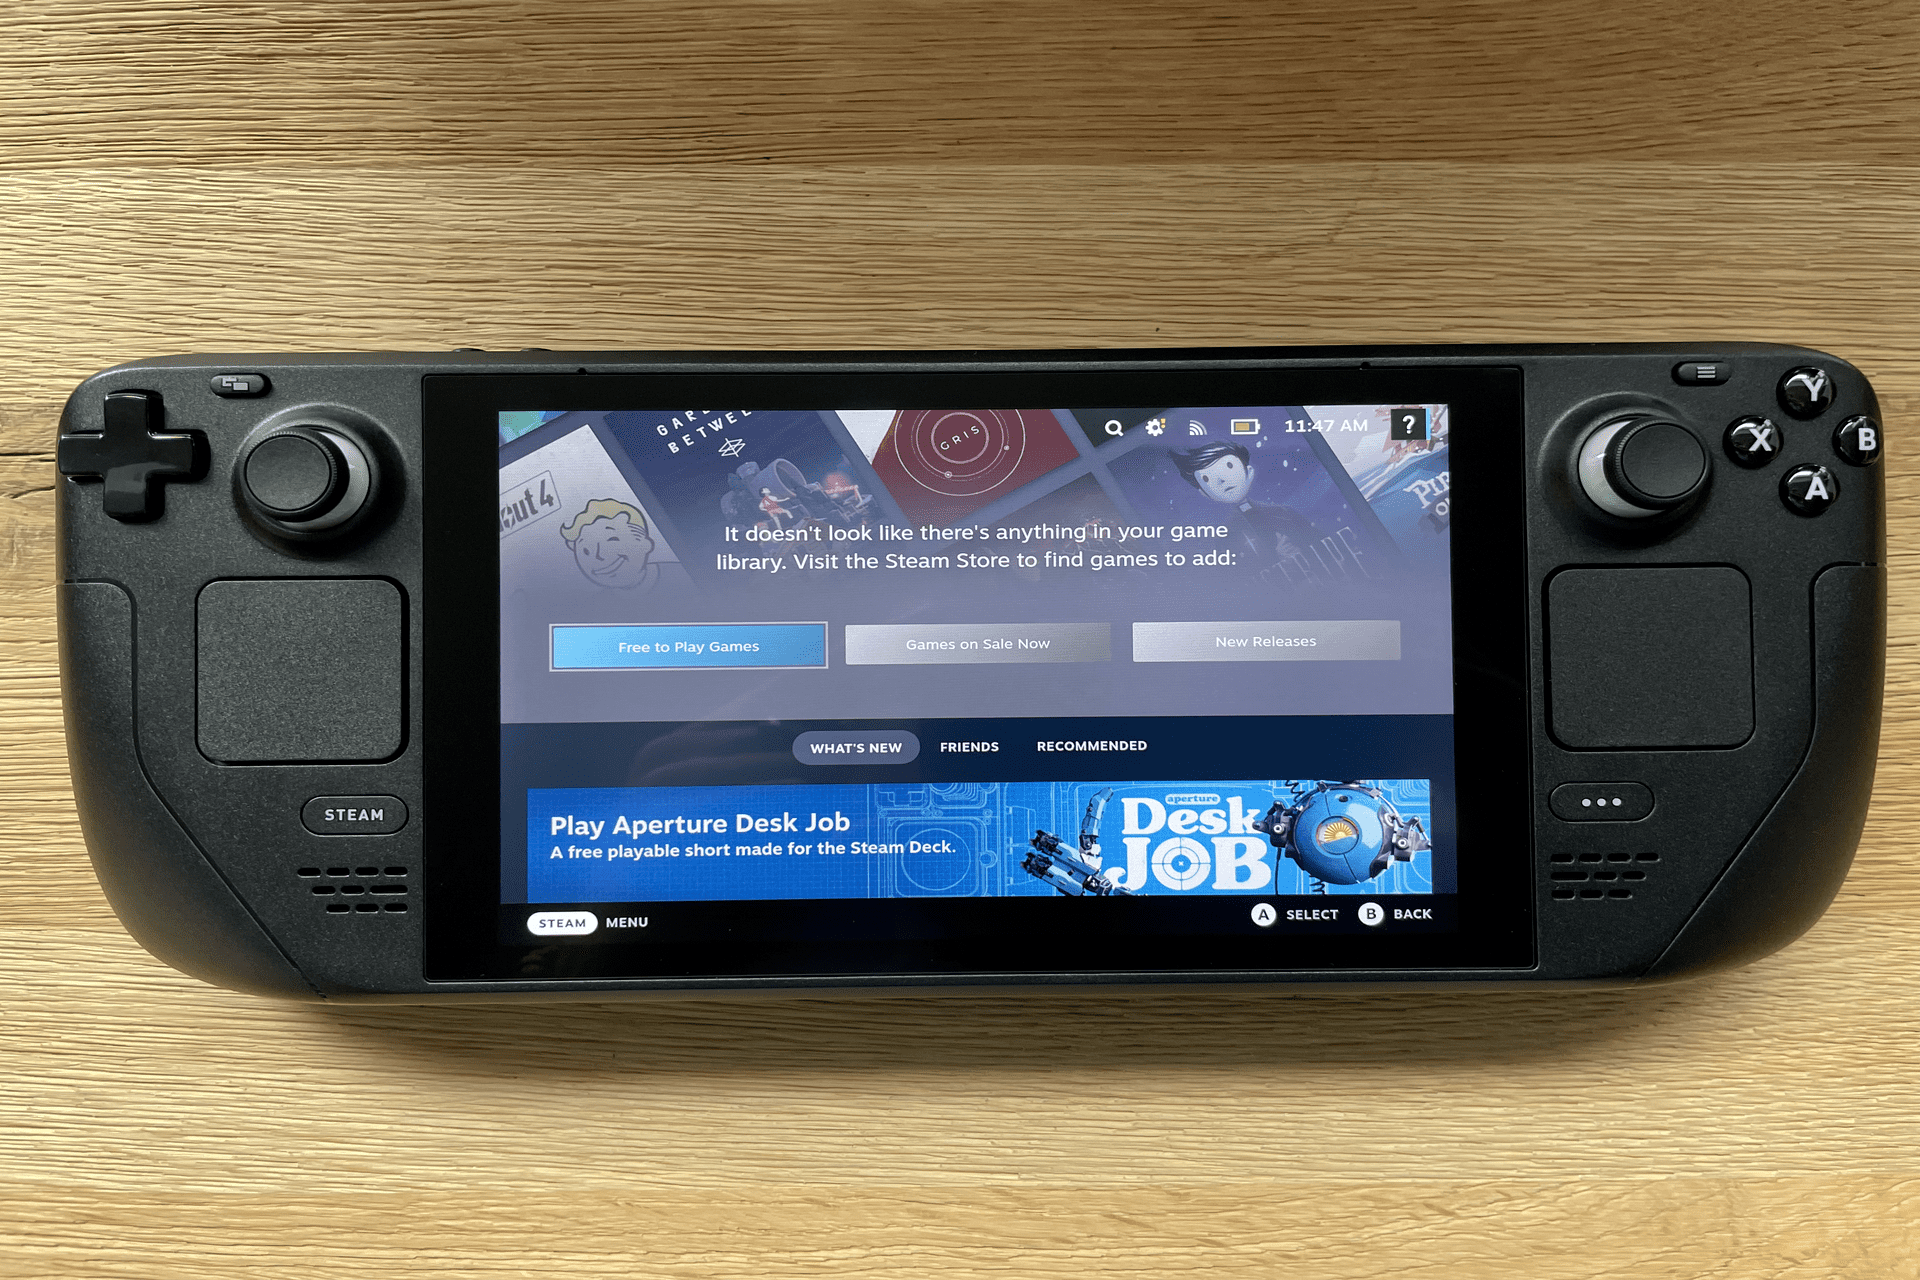 Steam Link APK (Android App) - Free Download